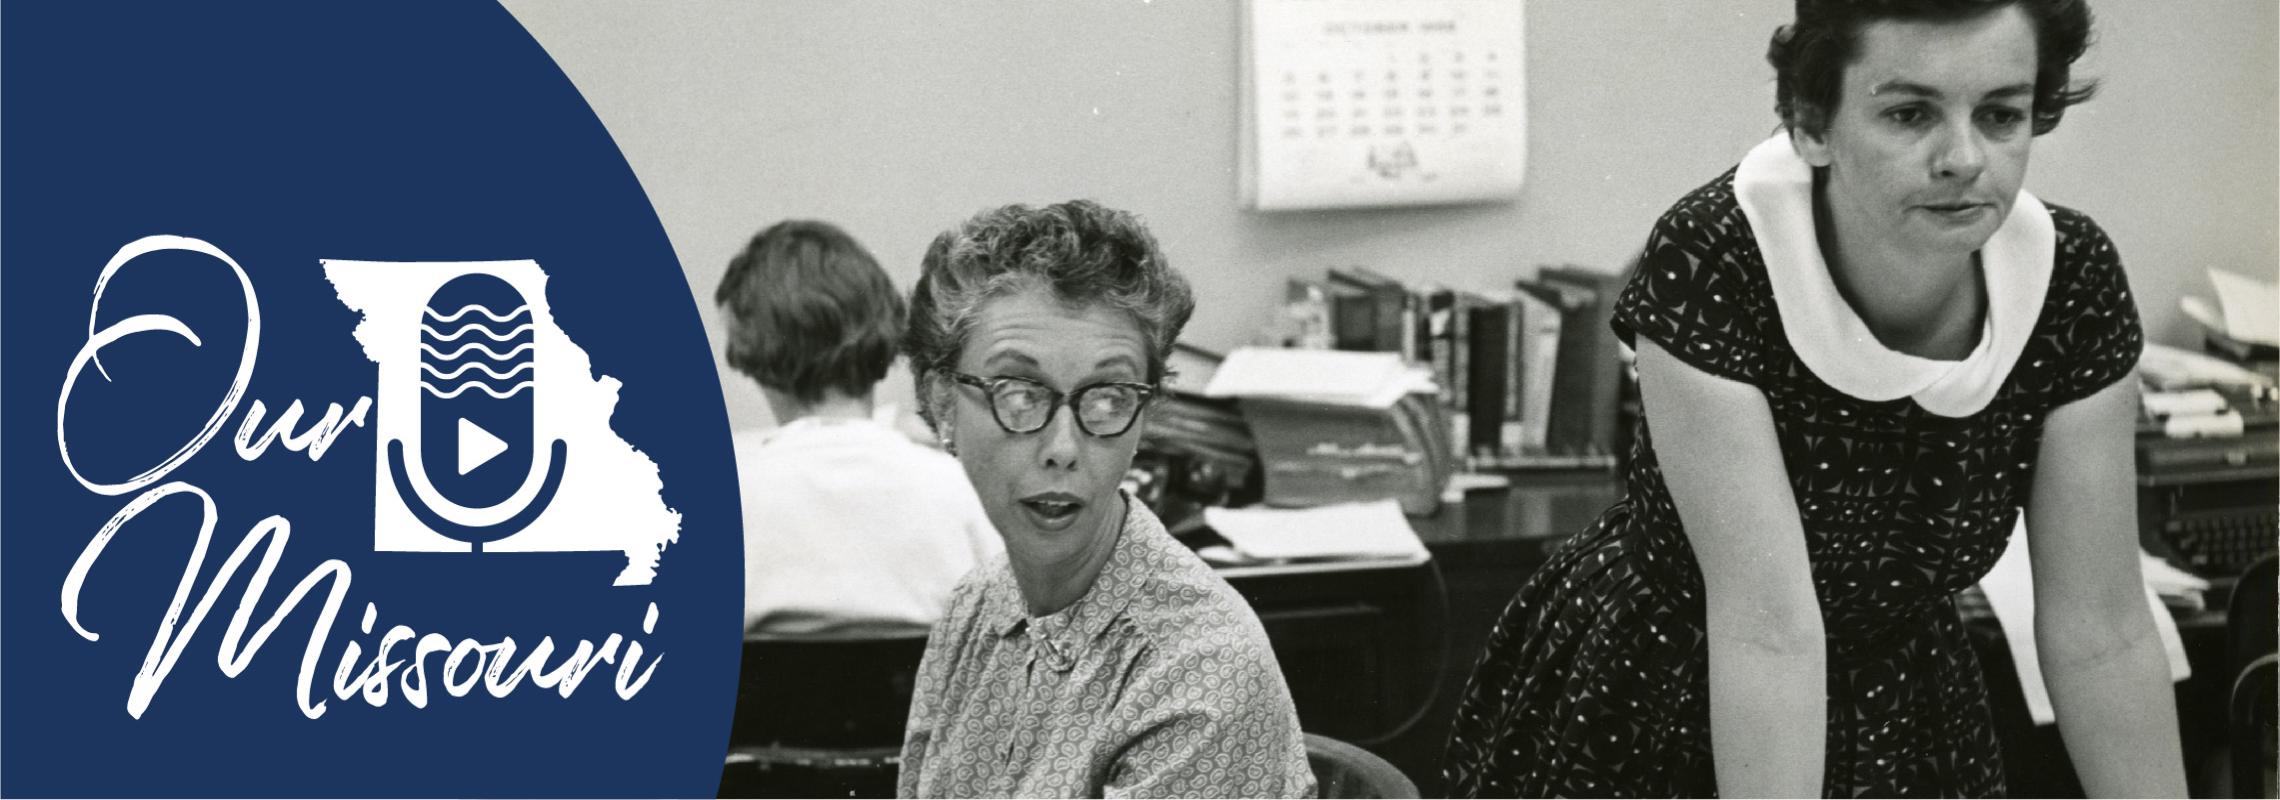 Vintage photo of two women in a newsroom